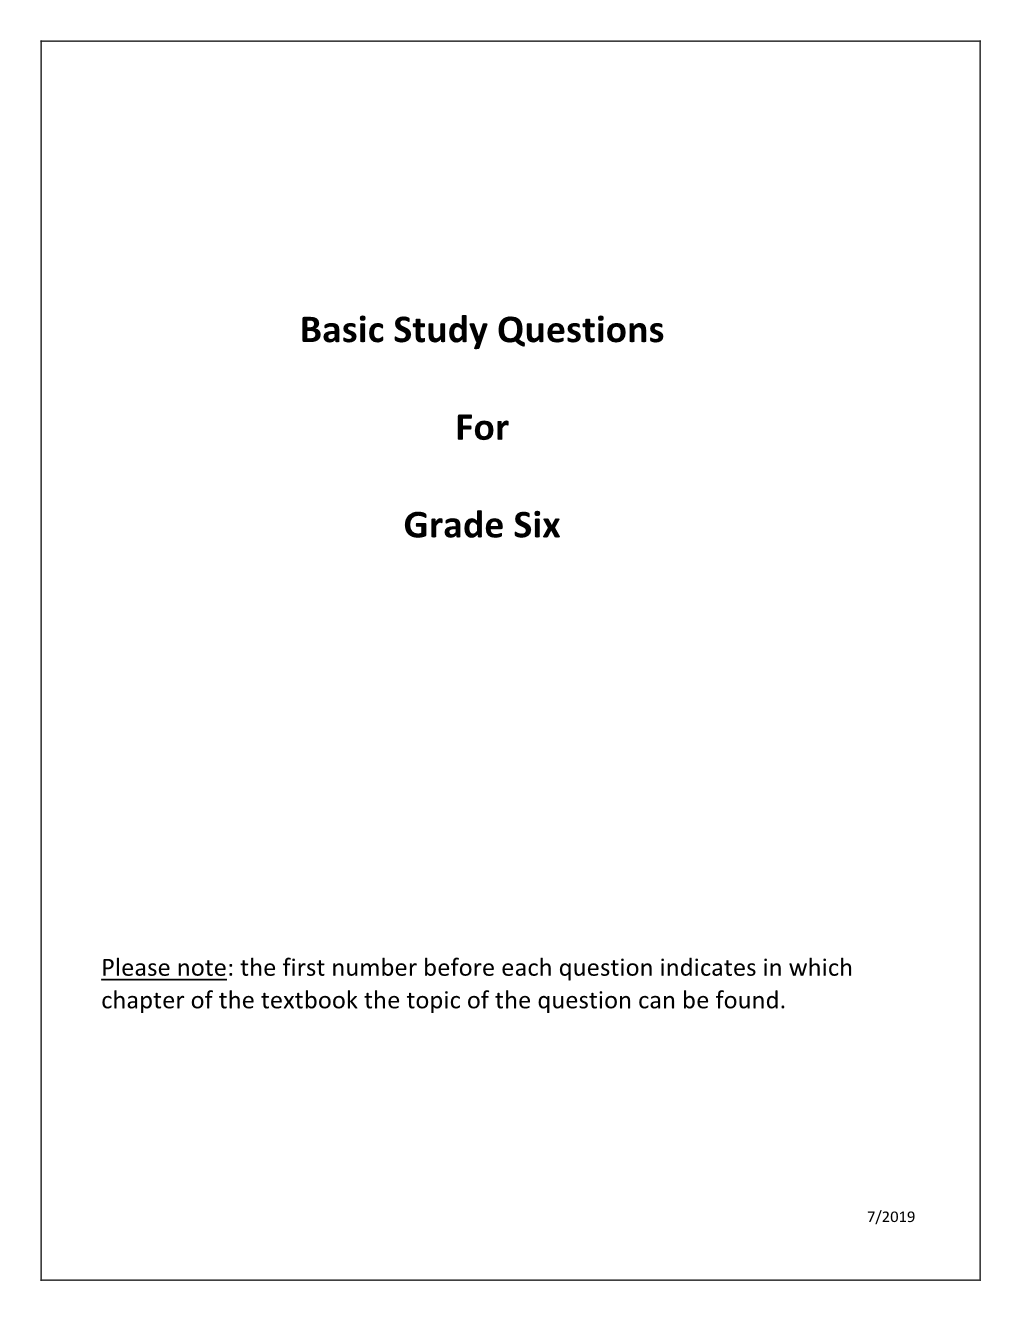 Basic Study Questions for Grade